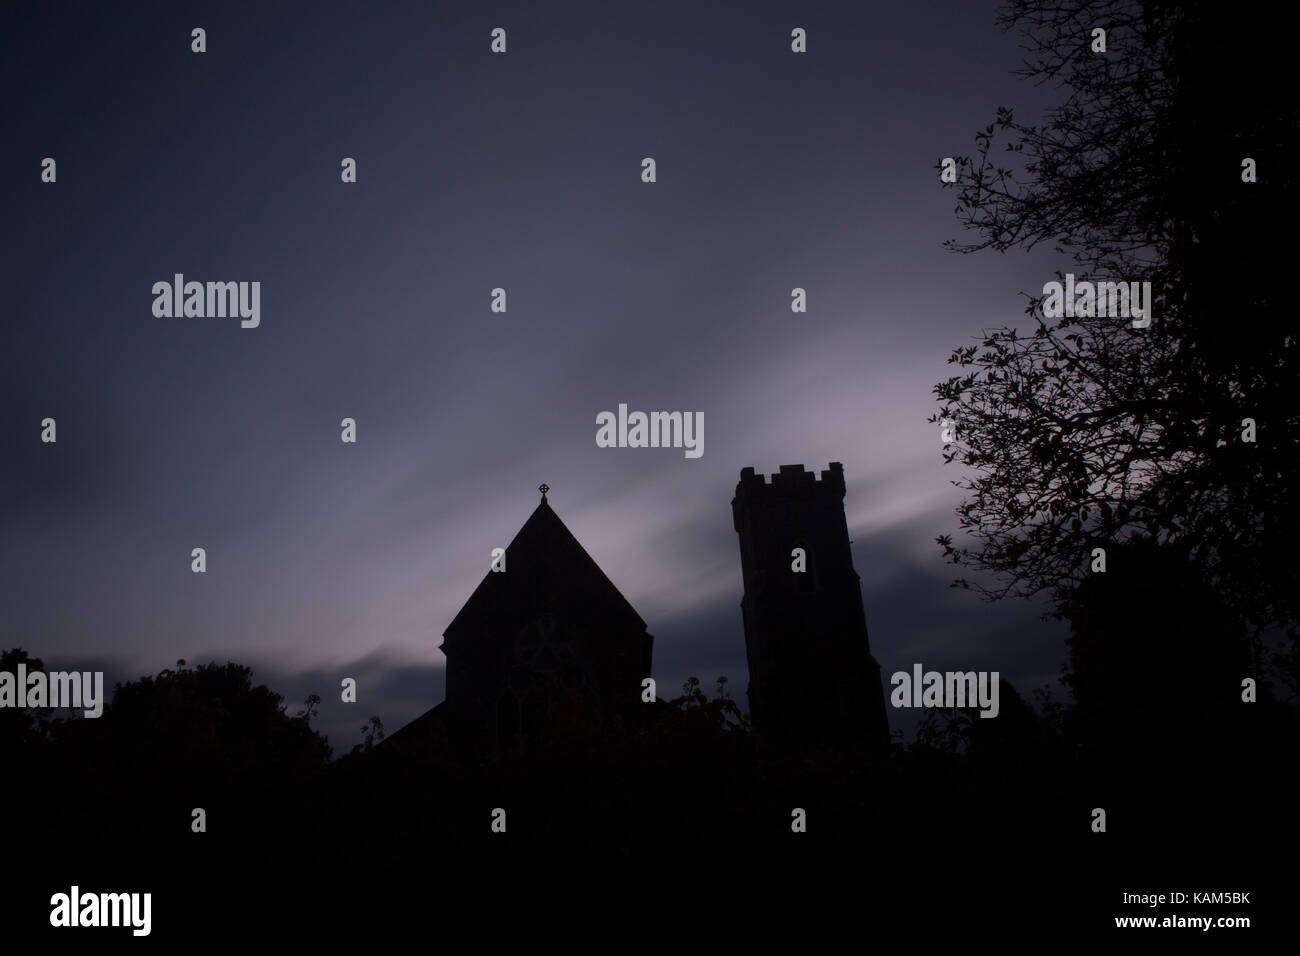 Long exposure of silhouette of a church at dawn making a scary, creepy, eerie scene with blurred clouds Stock Photo